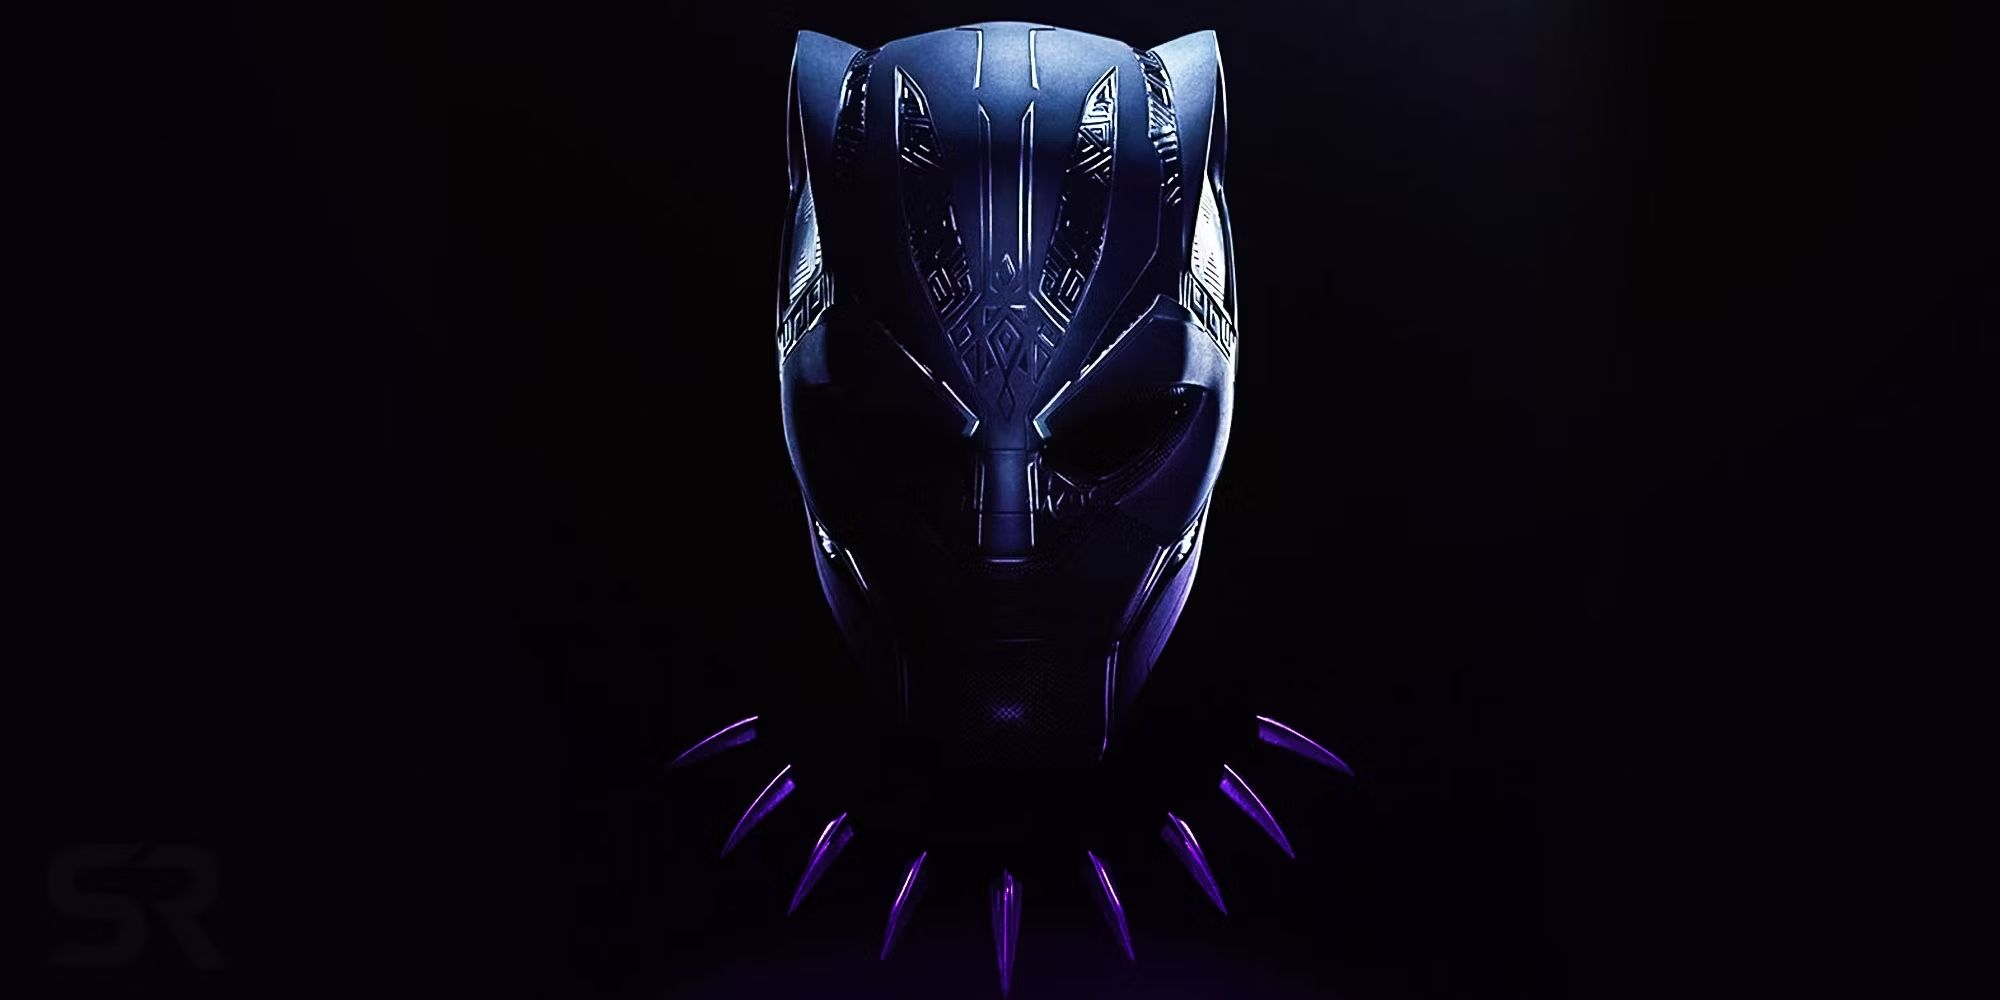 Wakanda Forever’s Box Office Compared To Black Panther: Will It Beat It?